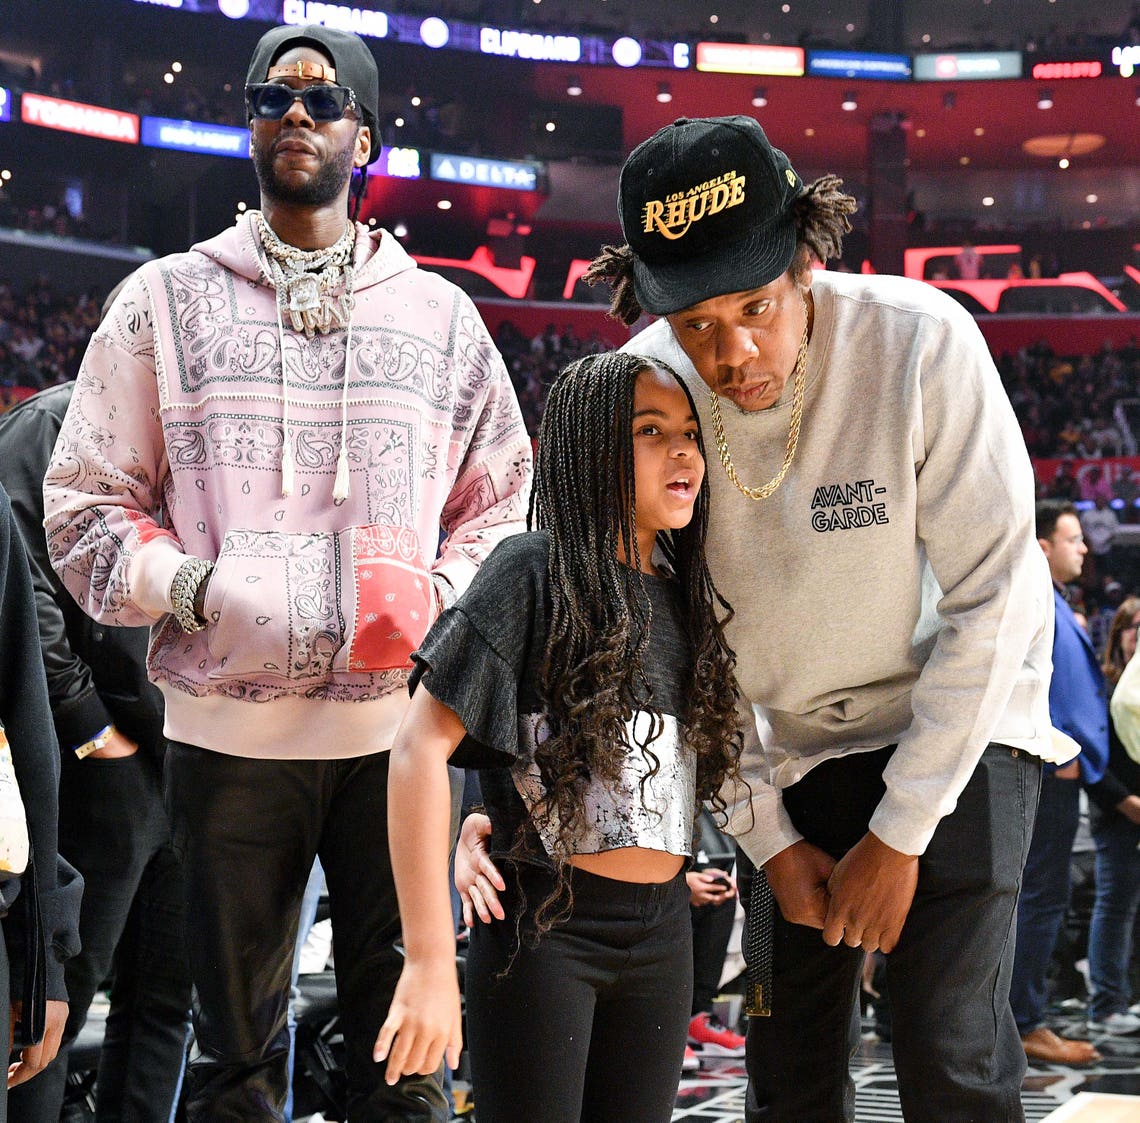 Blue Ivy Joins Dad Jay-Z Courtside for Adorable Father-Daughter Date